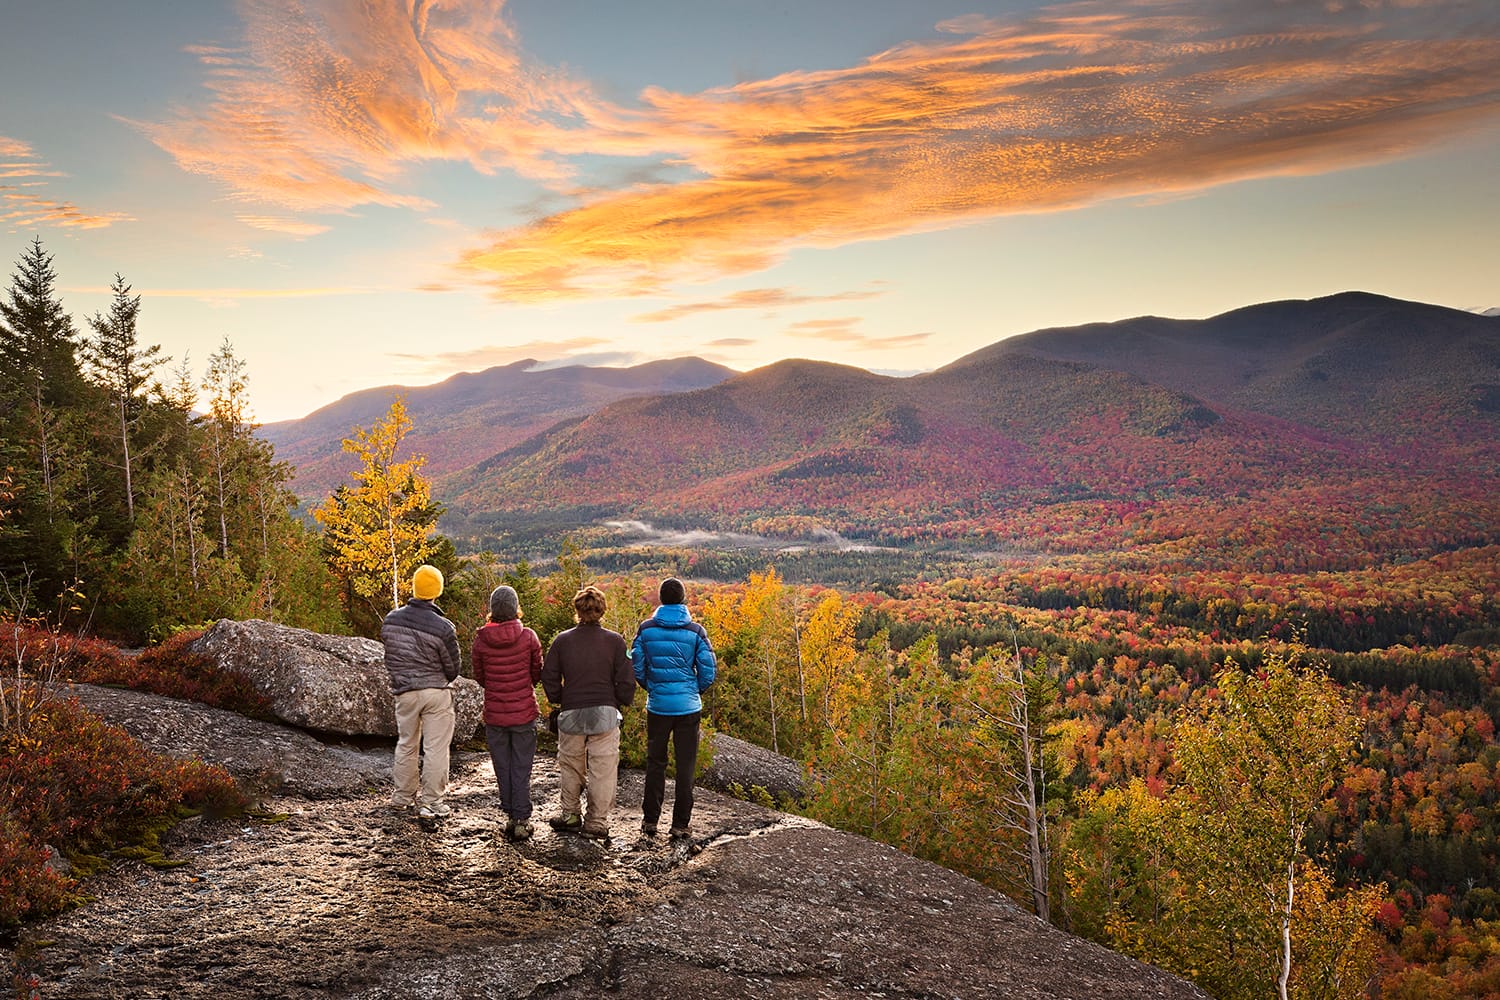 Group of hikers enjoying the view in the Adirondacks Mountains, NY, USA